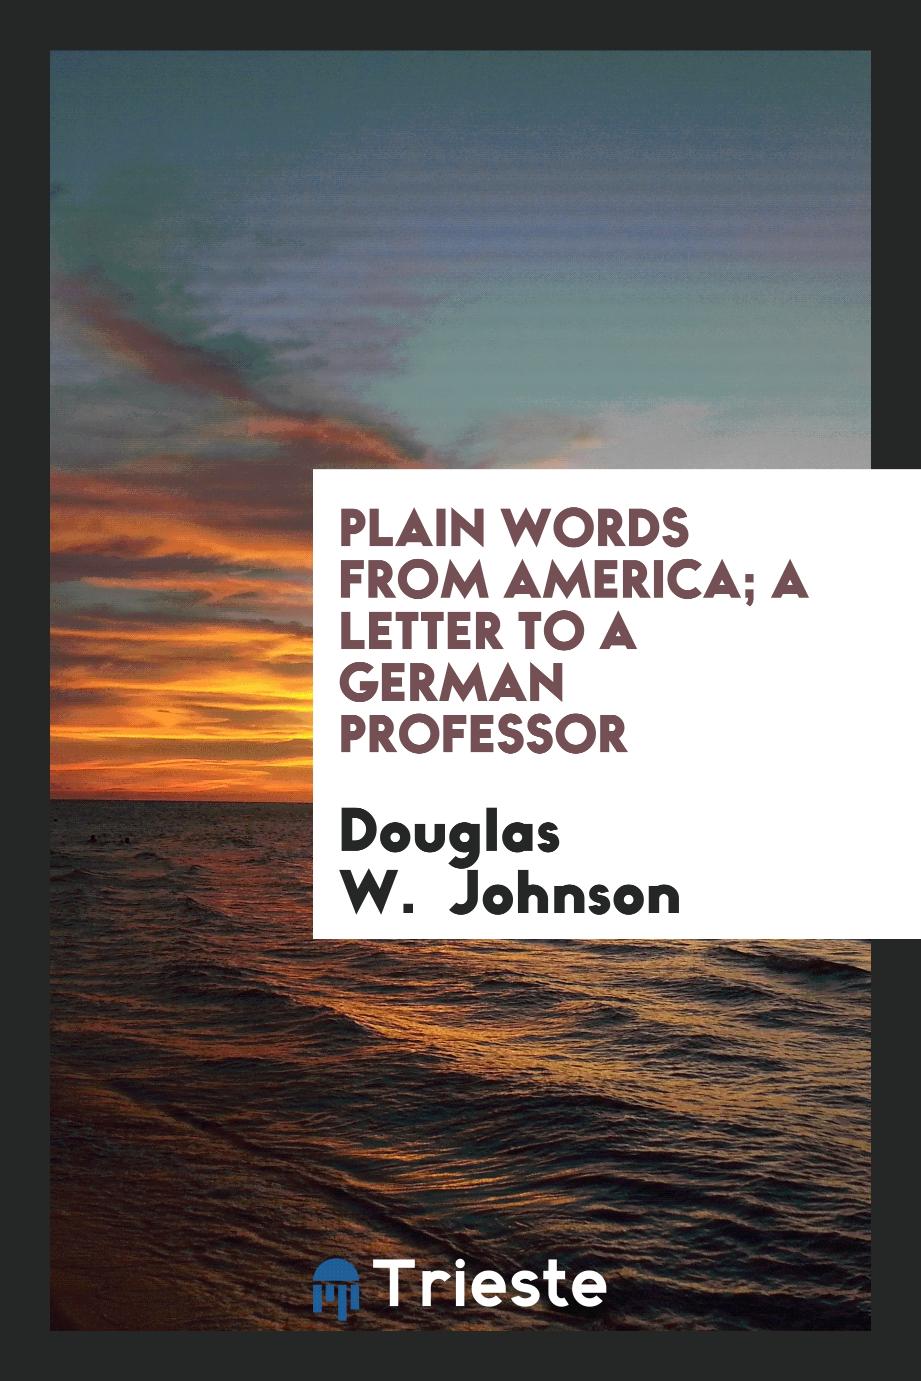 Plain words from America; a letter to a German professor